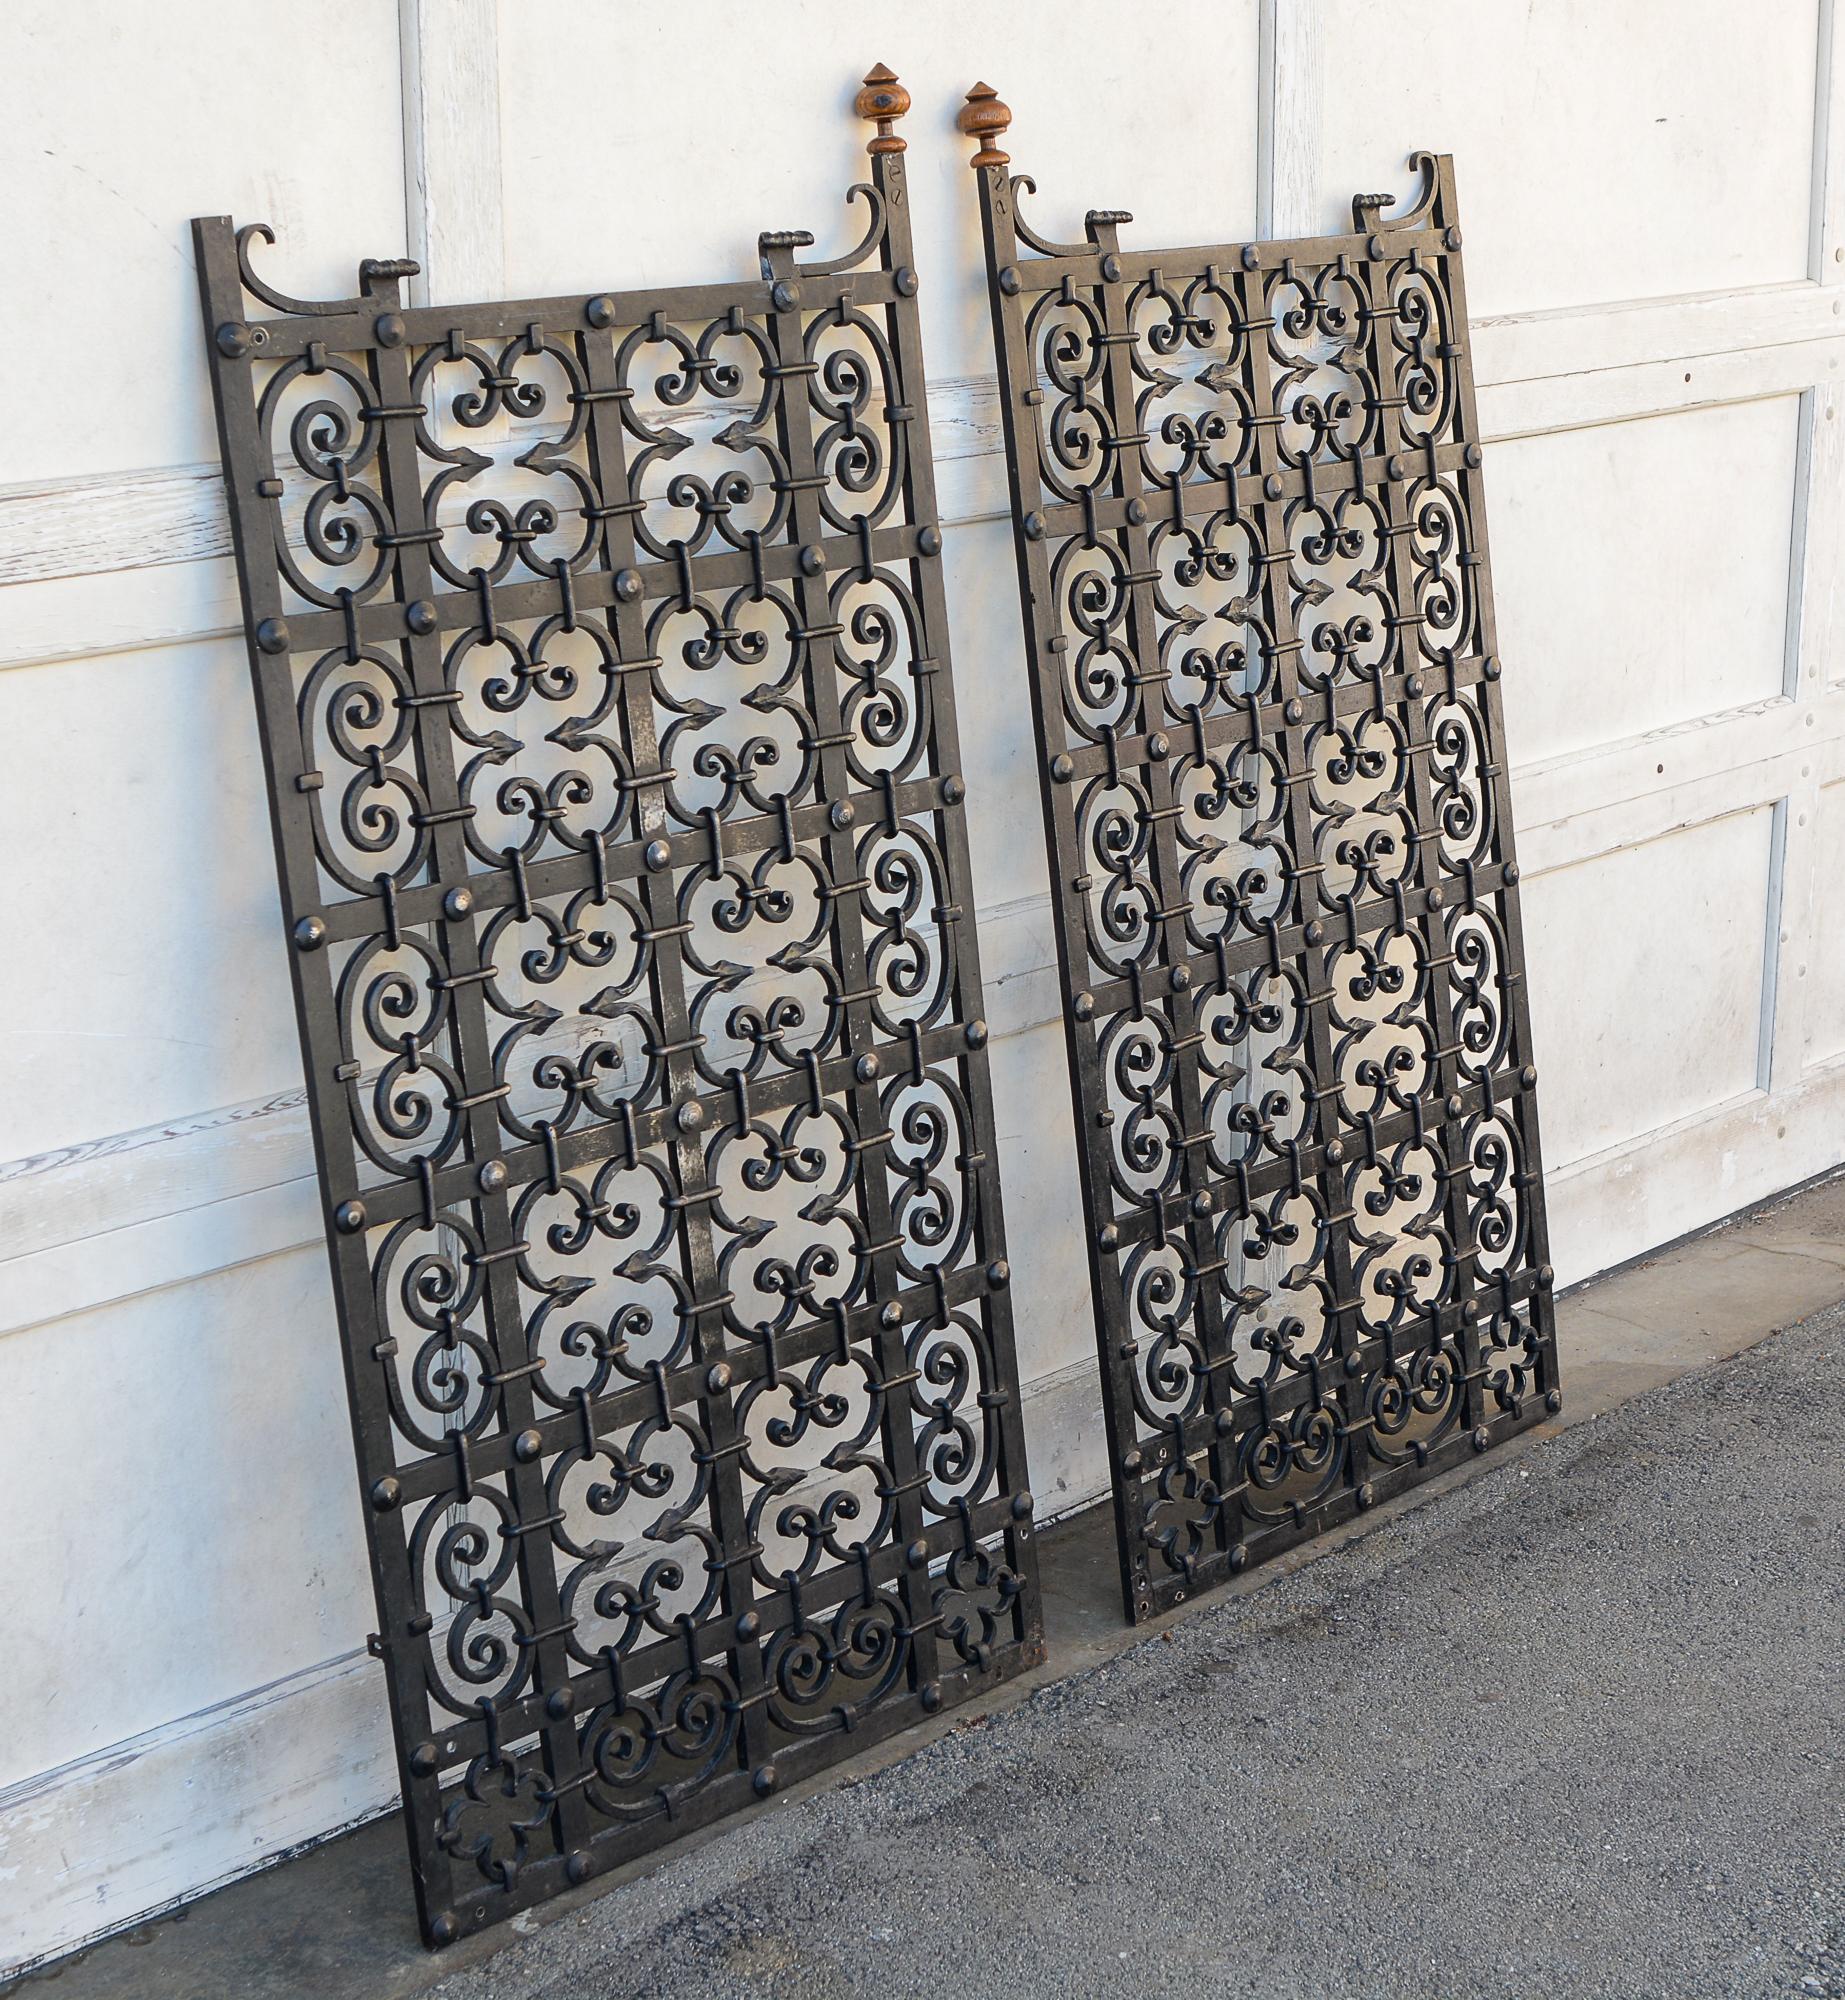 Pair of heavy forged iron gates. There is a lot of work put into these with large rivets and iron wrapping. The gates are from the Pittsburgh area originally. The side rails probably extended higher at one time but were cut down. The previous owner